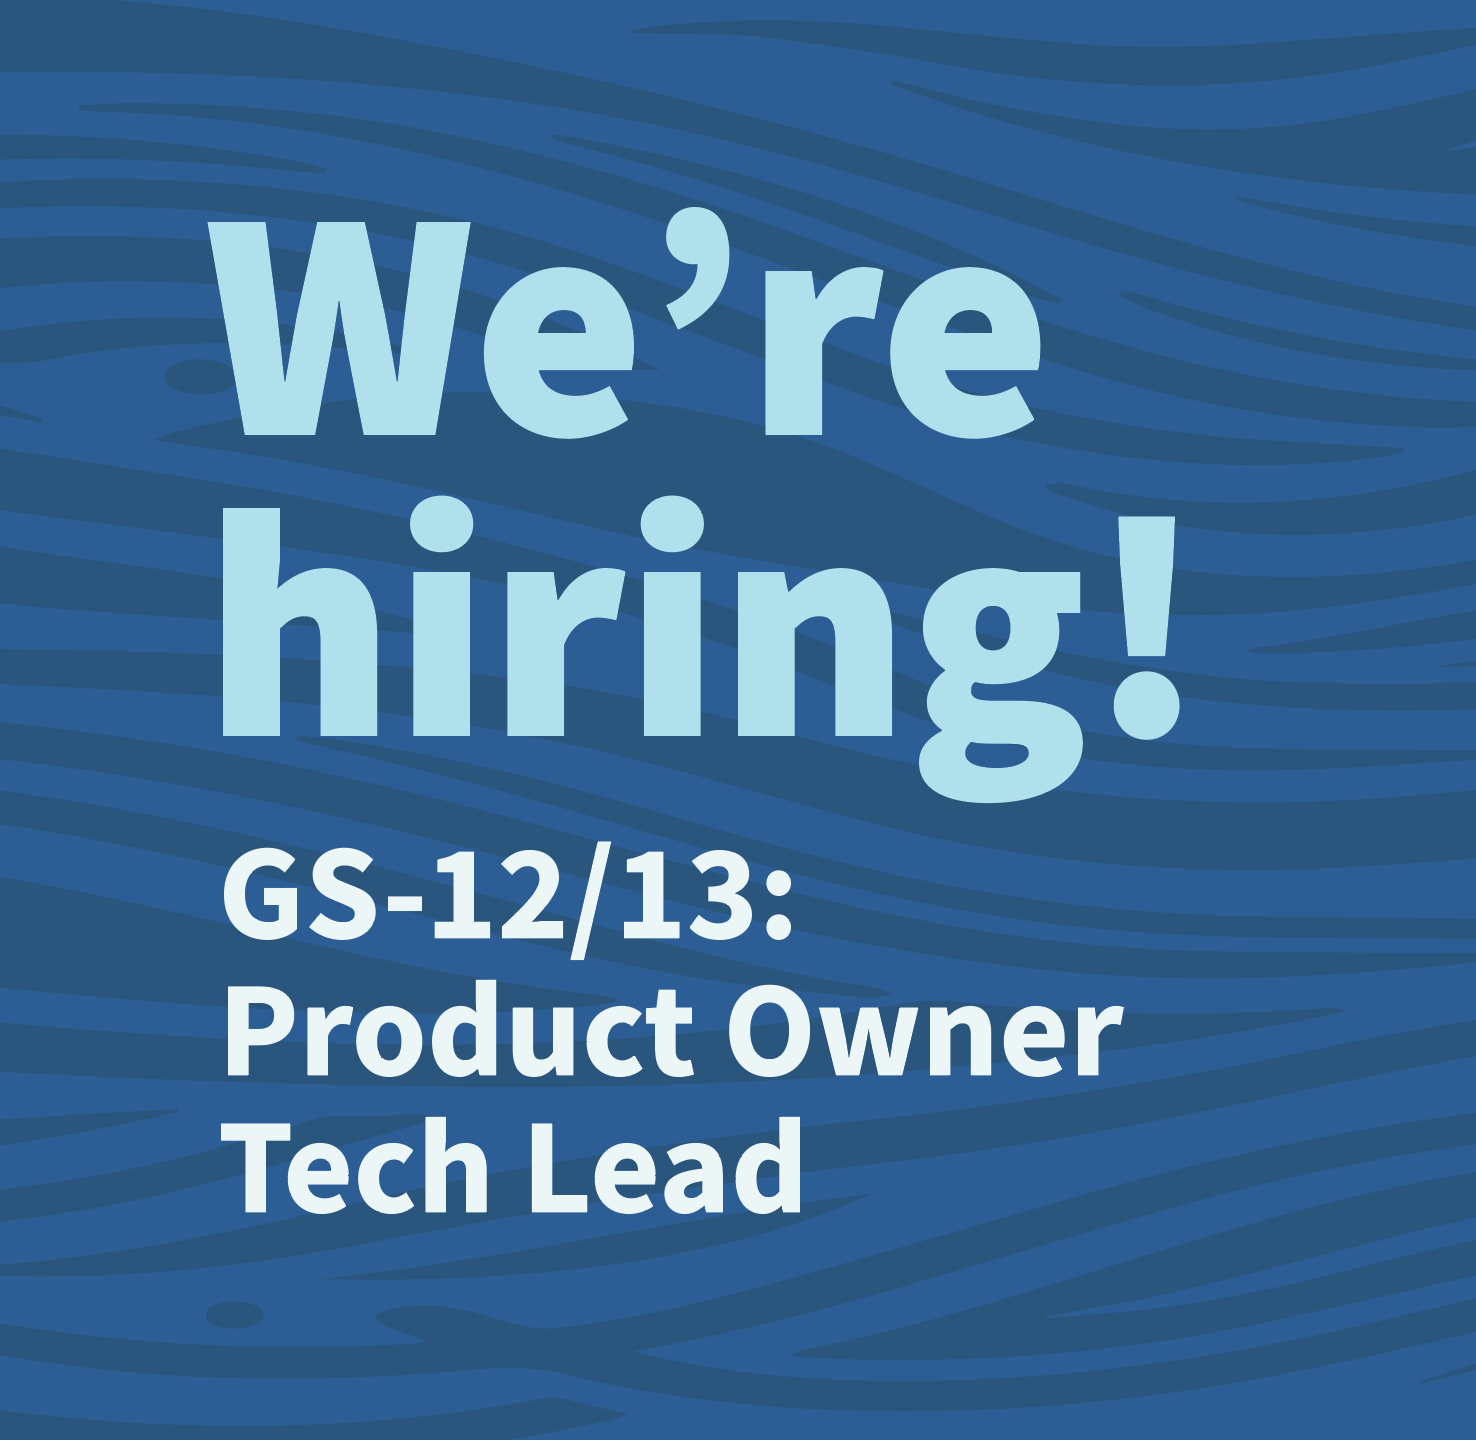 Product Owner and Tech Lead Hiring